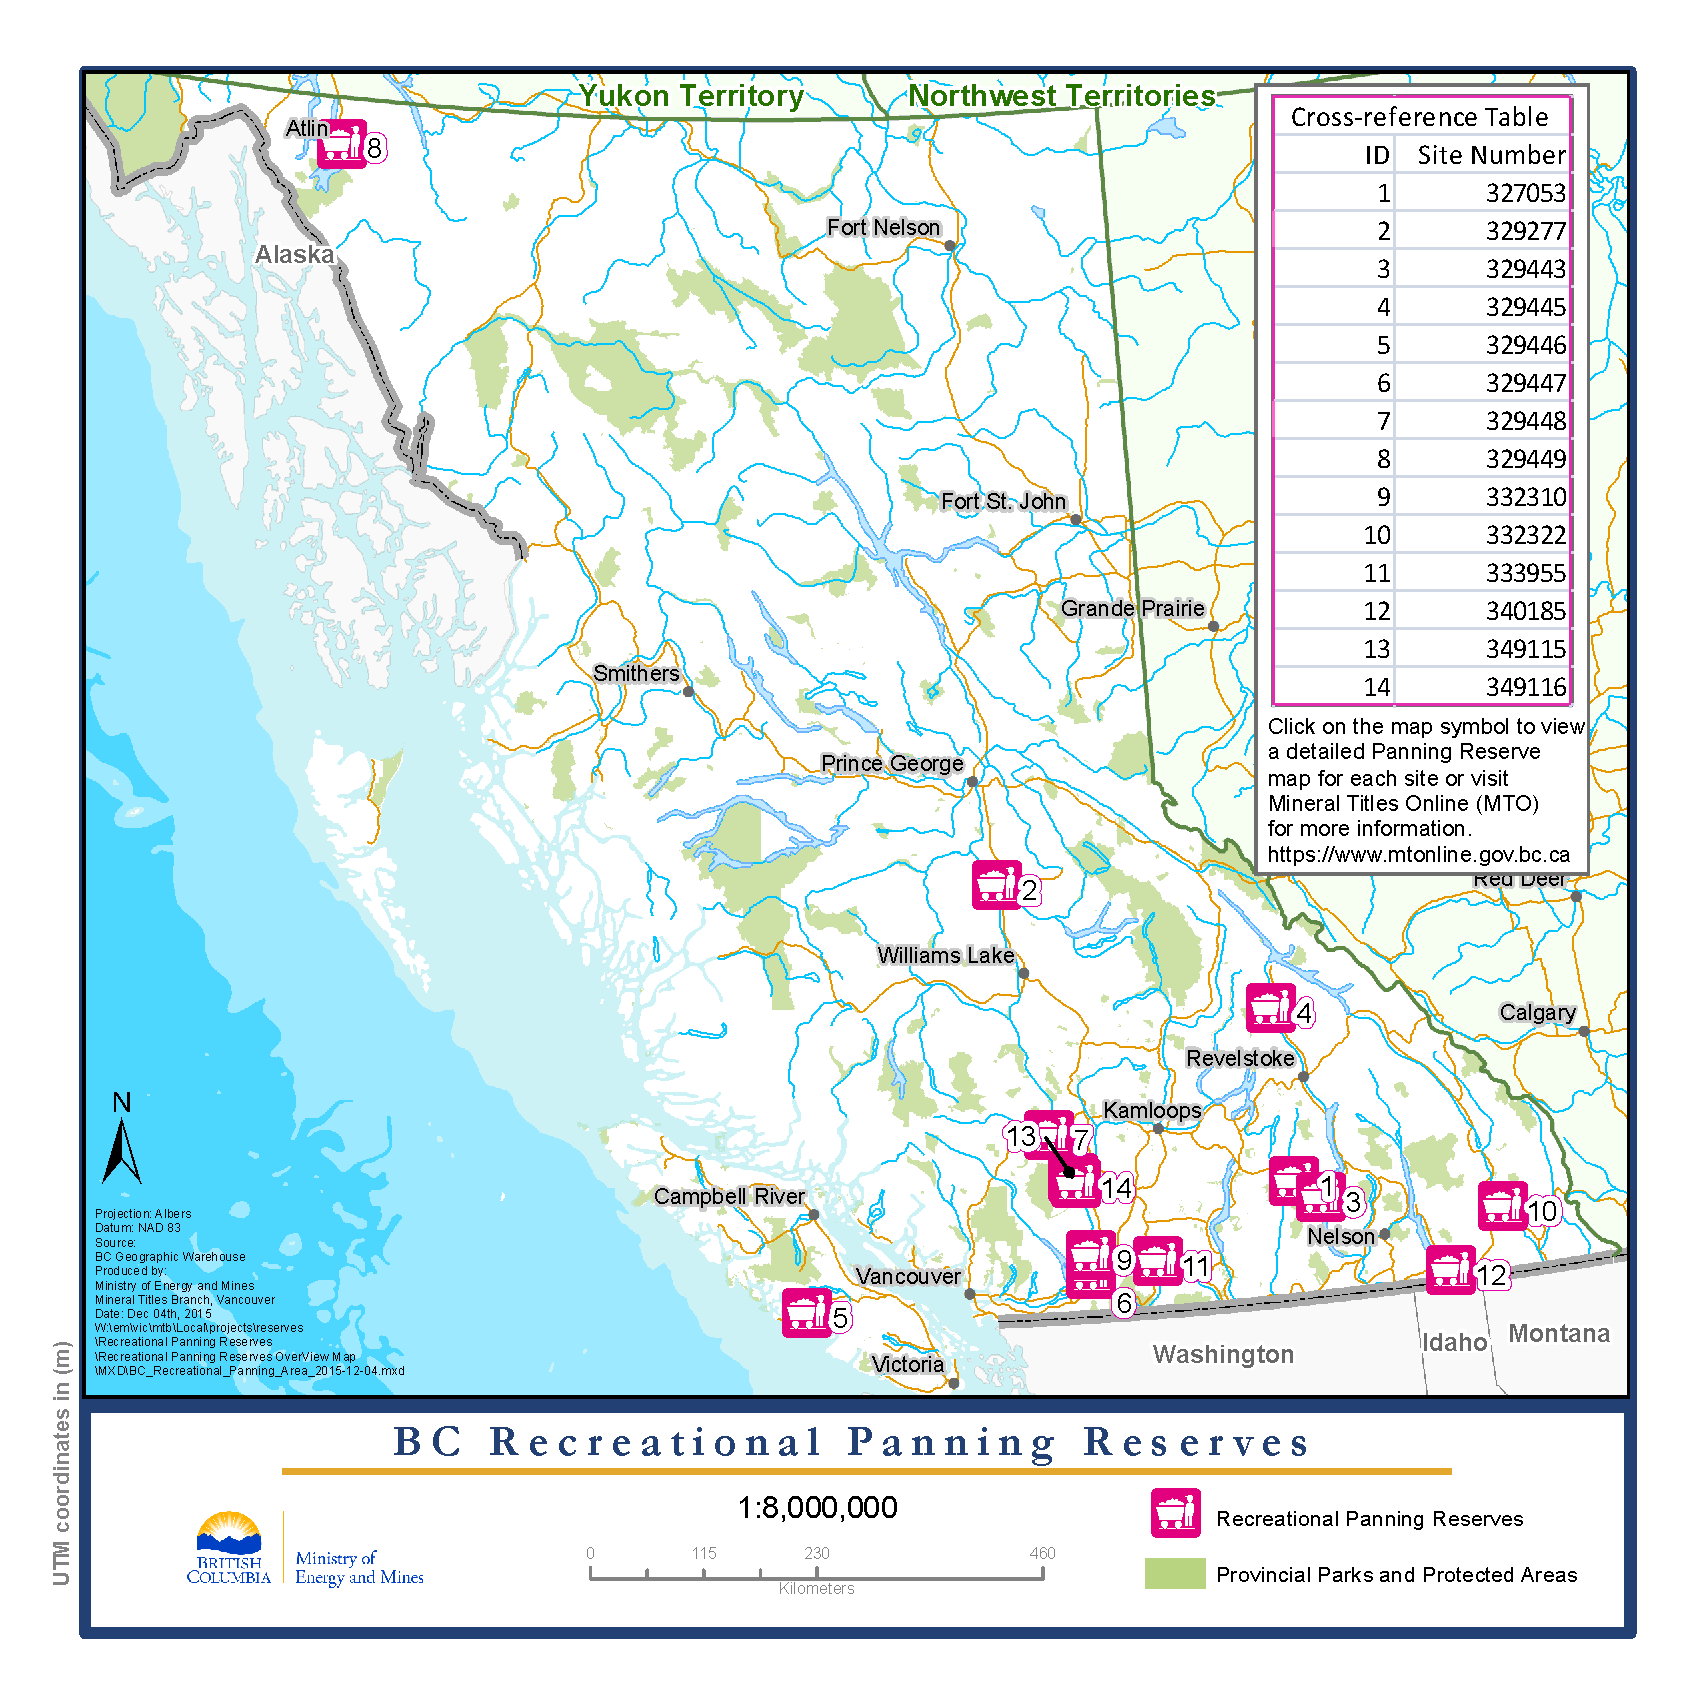 Overview Map of the BC Recreational Panning Reserves